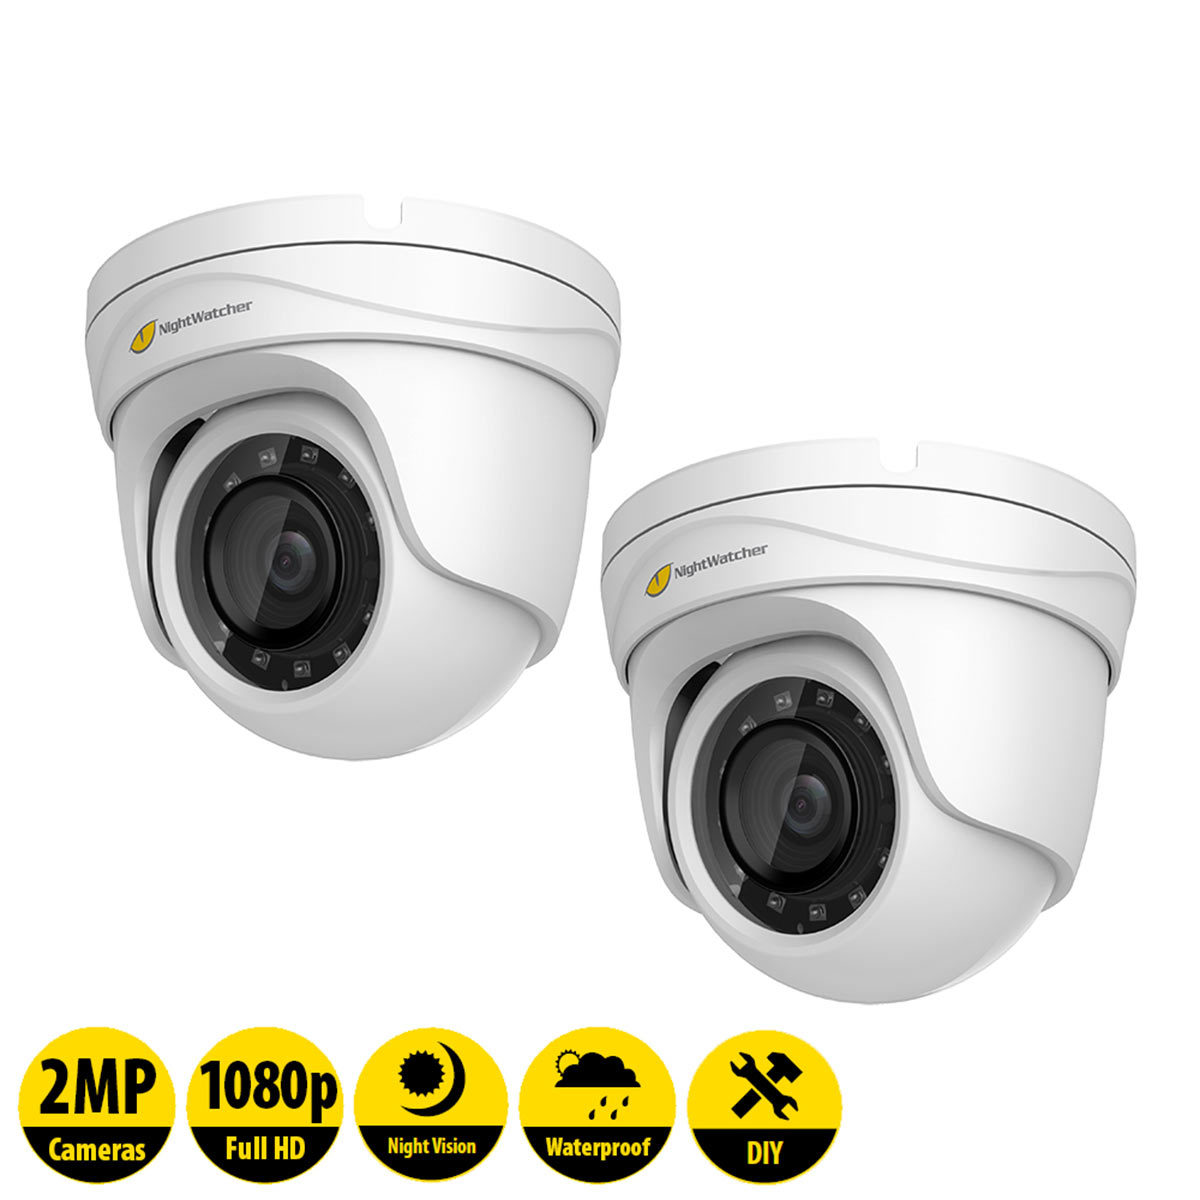 NightWatcher 2MP Full HD Dome Cameras Twin Pack